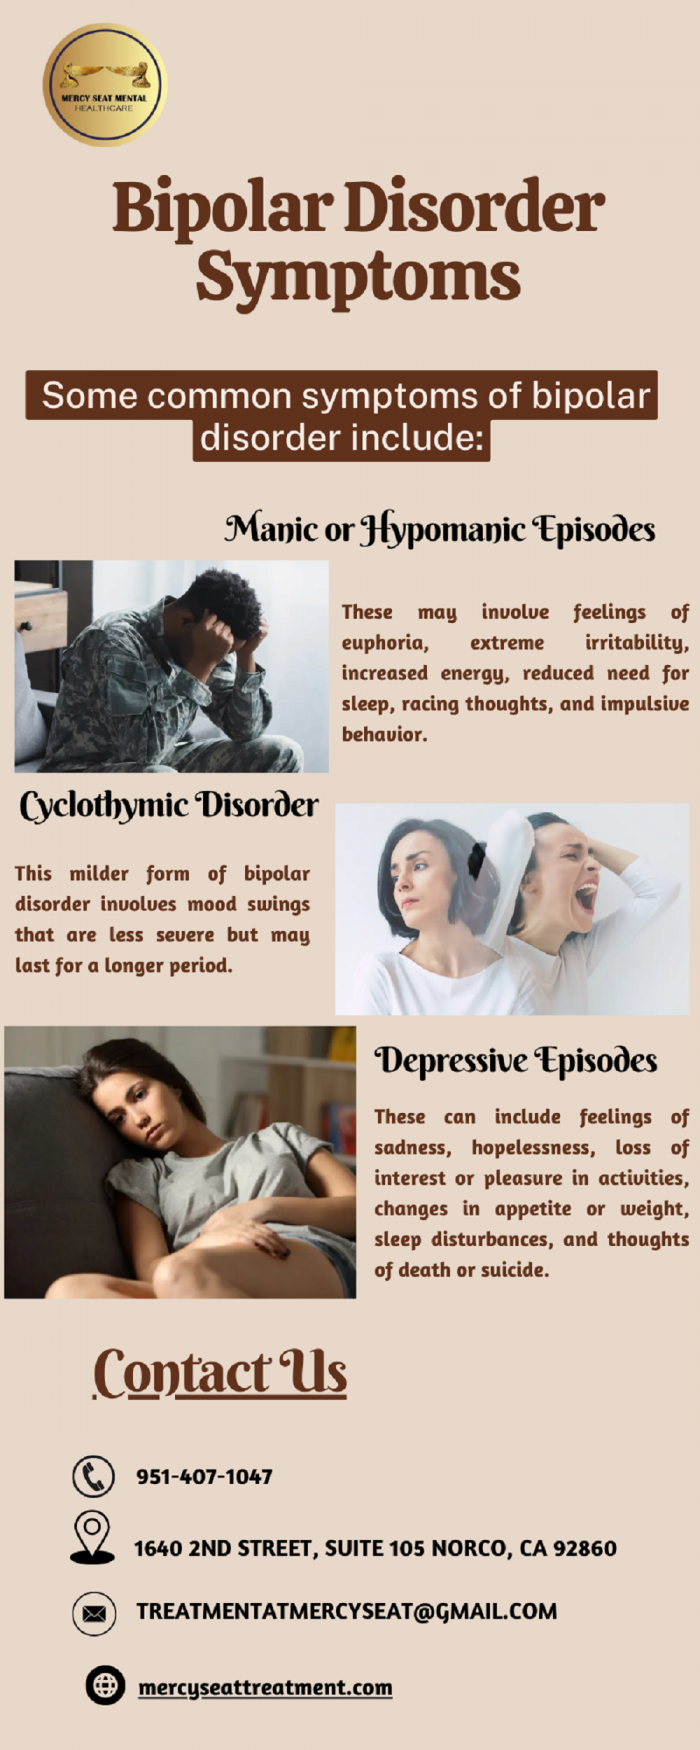 Need to Know About Bipolar Disorder and Its Impact on Daily Life